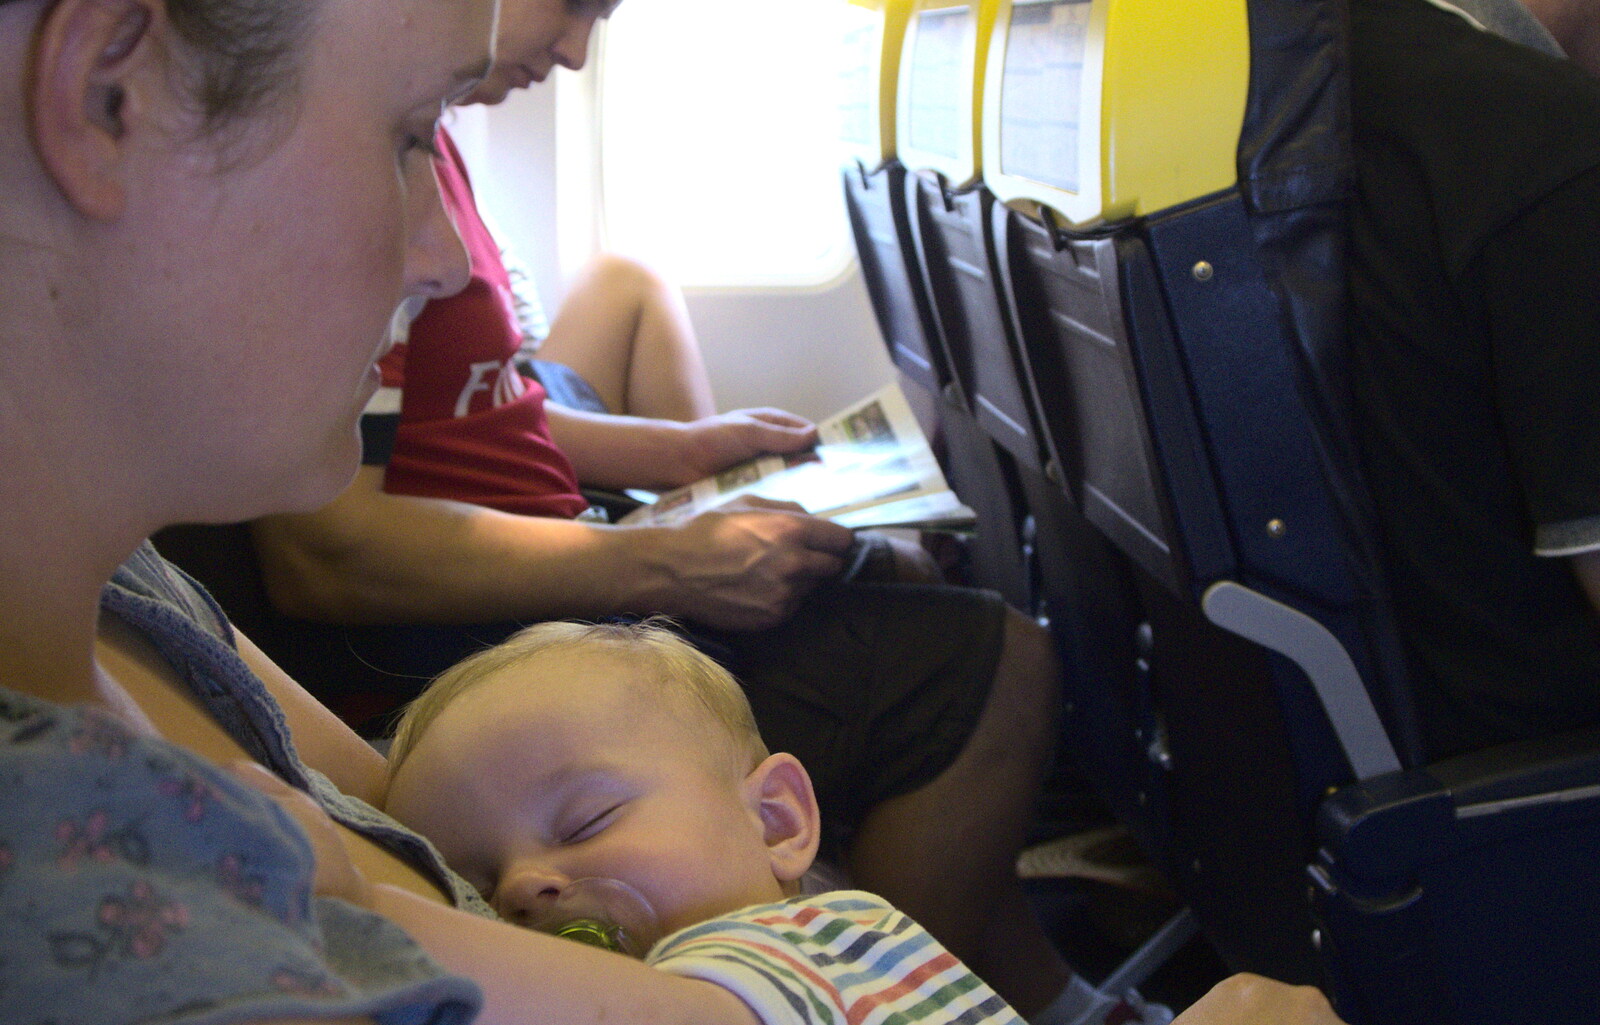 Harry - Mister Cheese - is asleep on the plane from A Trip to Sóller, Mallorca, Spain - 8th-14th September 2012